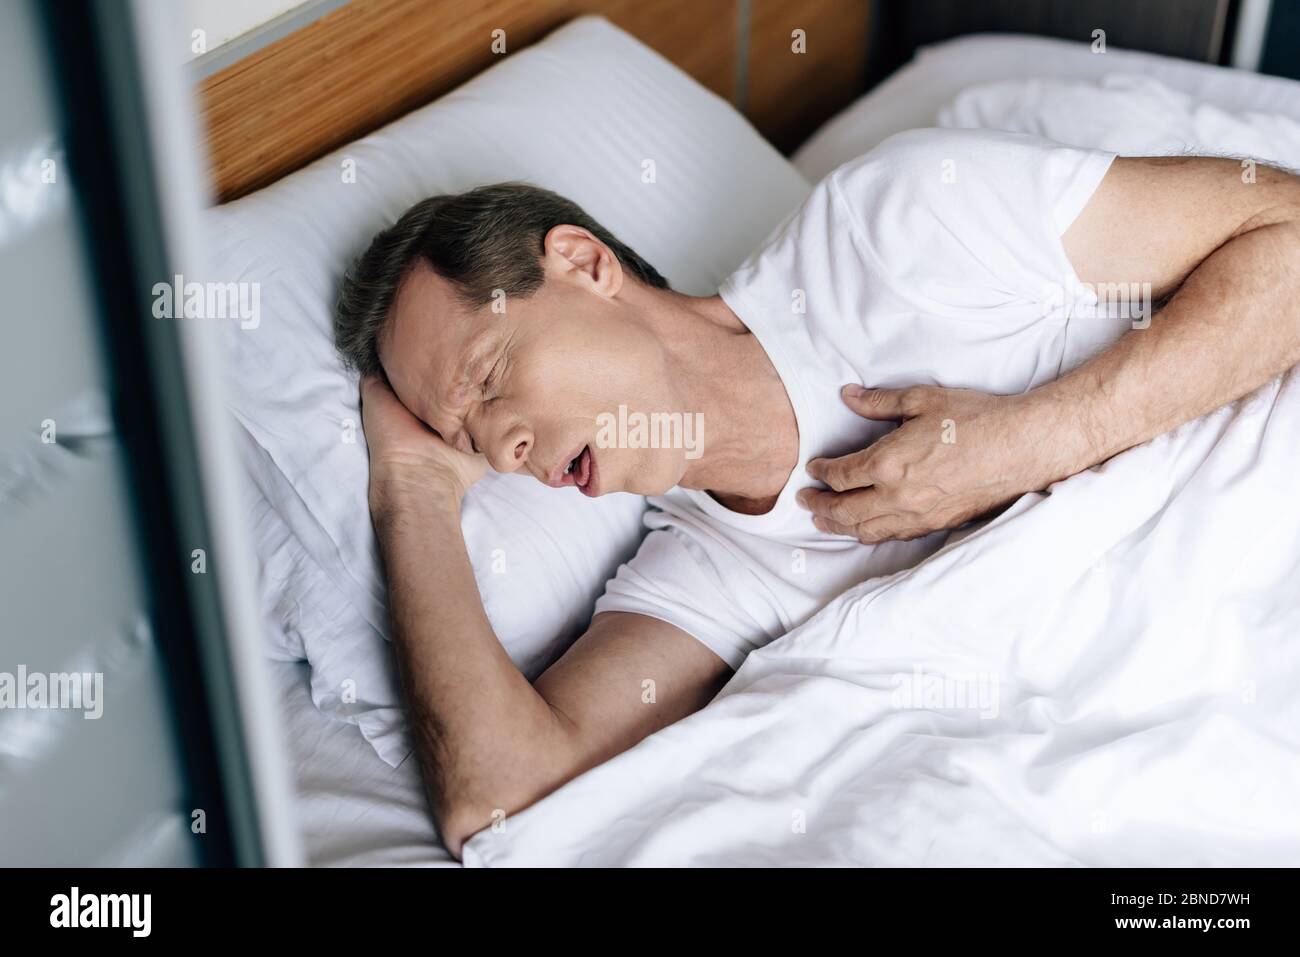 https://c8.alamy.com/comp/2BND7WH/overhead-view-of-sick-man-coughing-while-lying-on-bed-2BND7WH.jpg